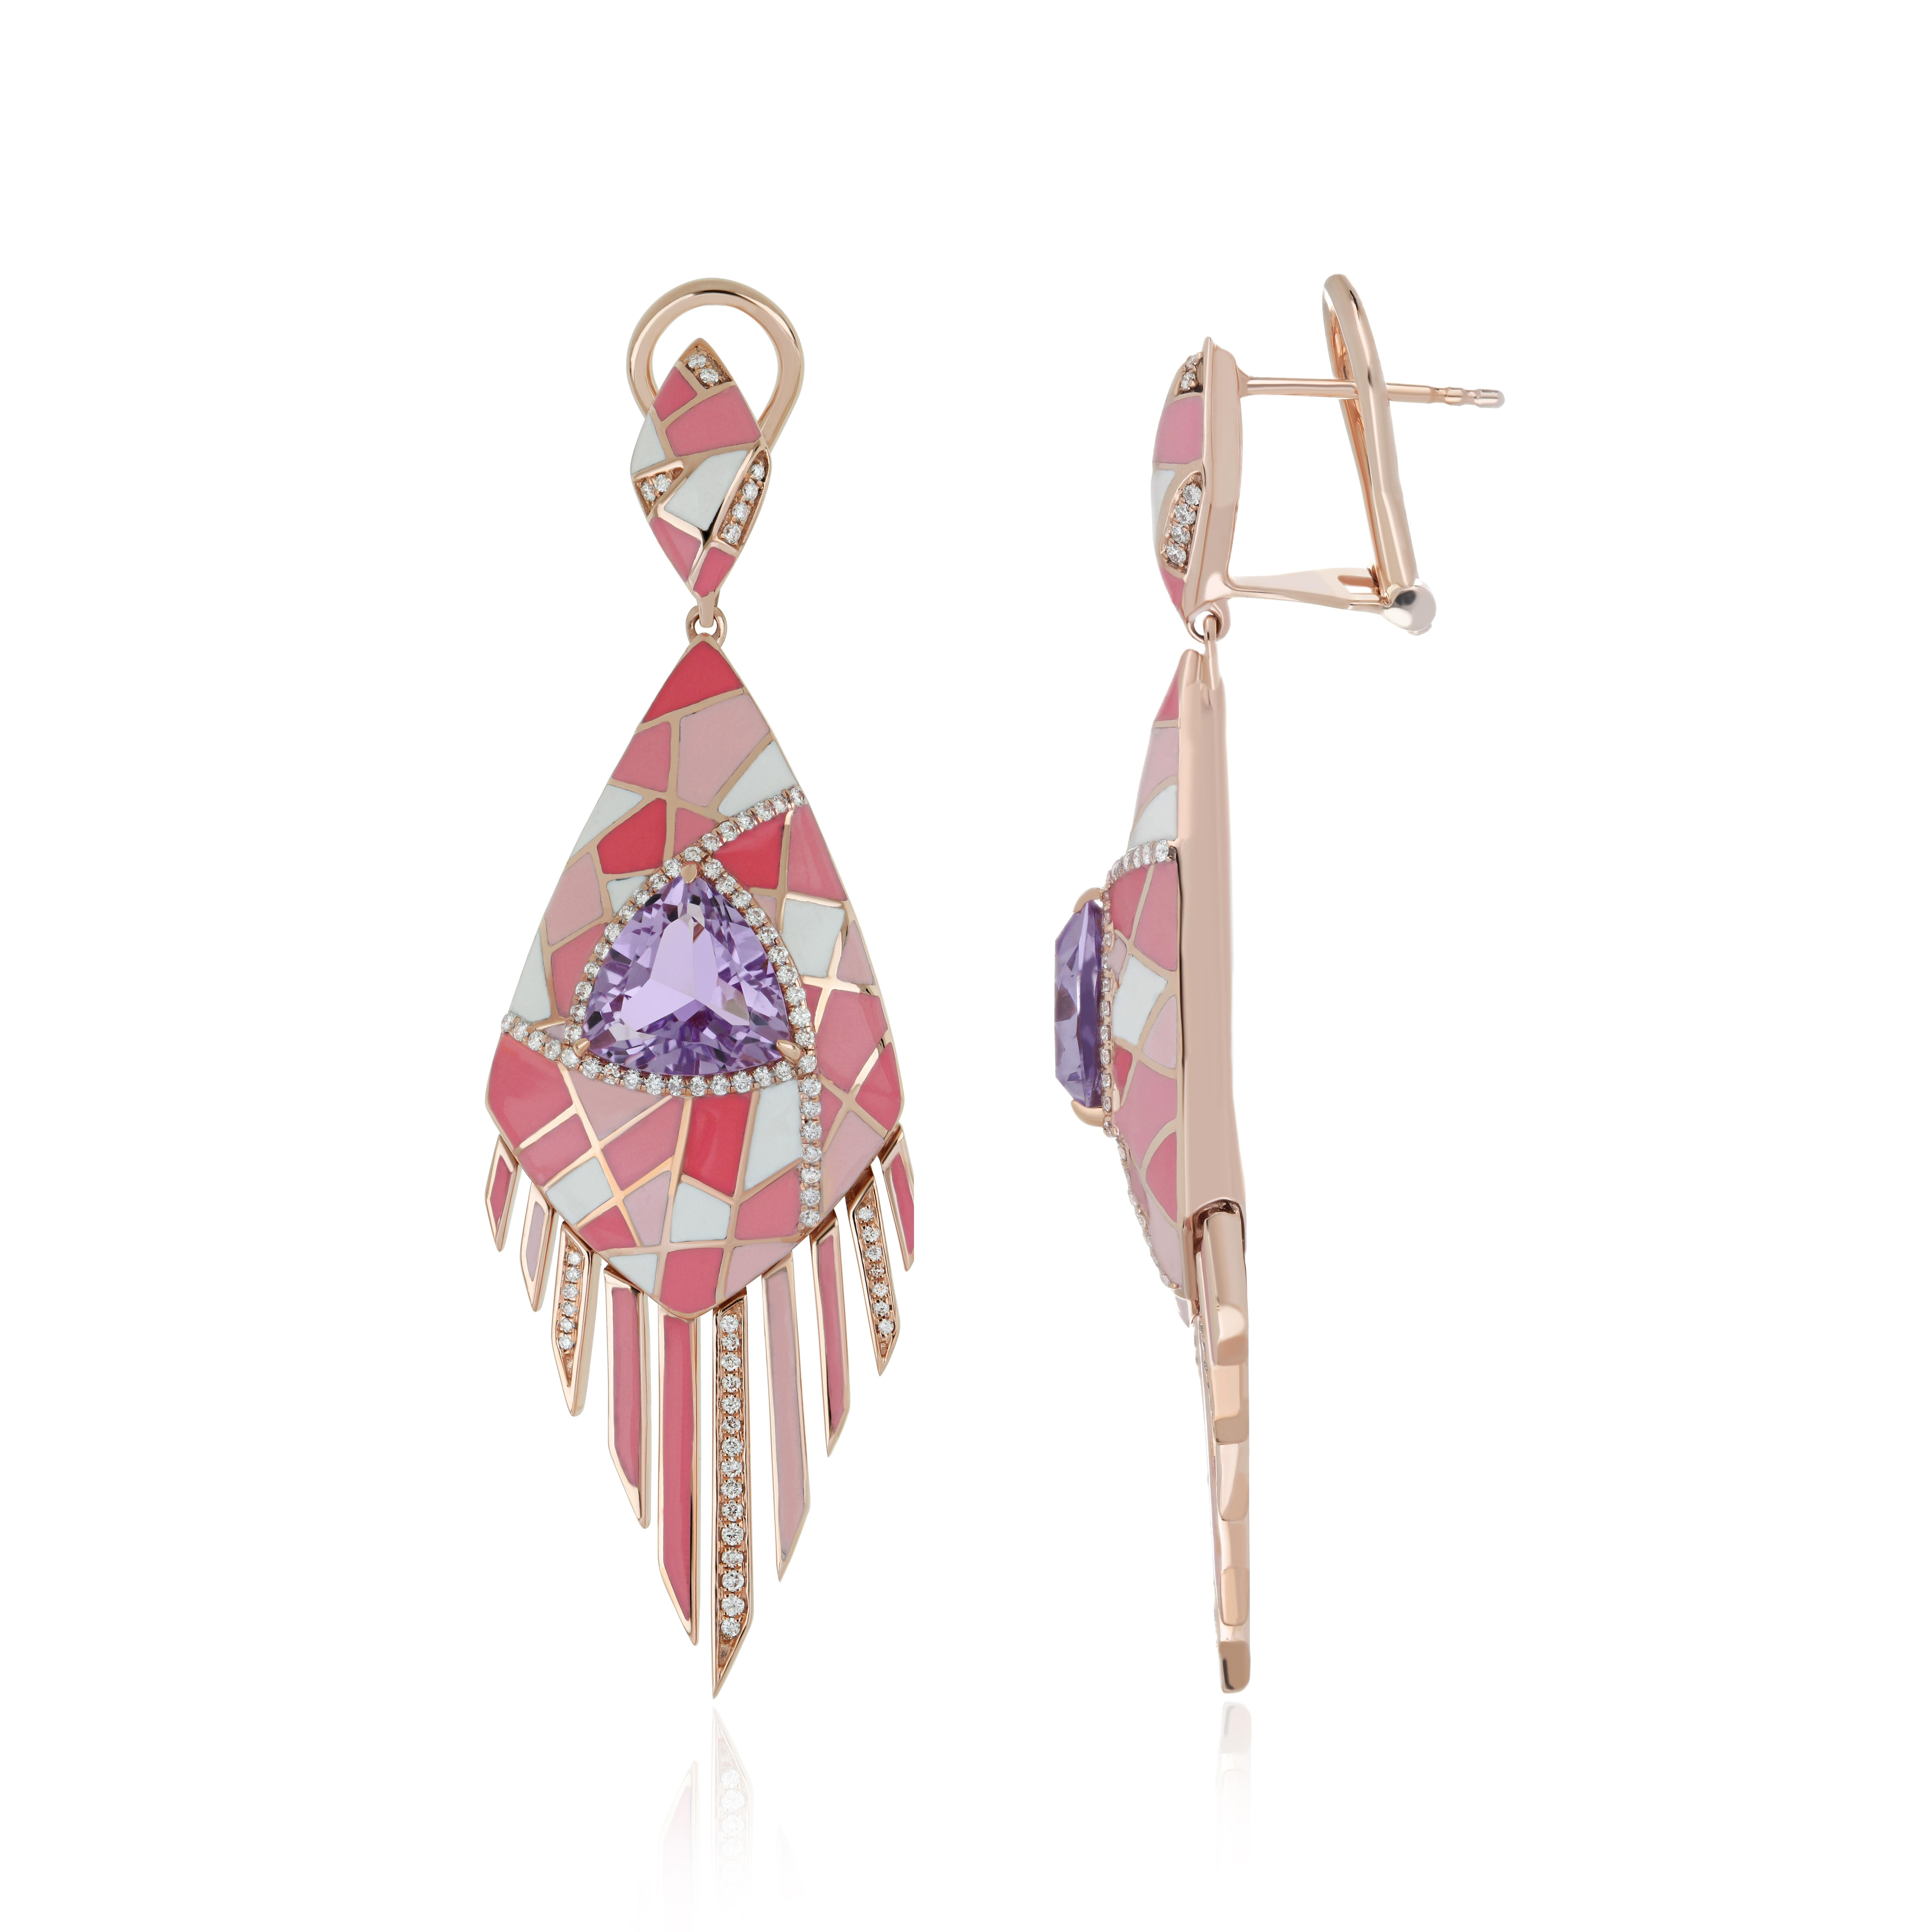 Elegant and Exquisitely detailed 14karat Roes Gold Earring, with 4.2 Cts (approx. total ) Trillion Shape Pink Amethyst Surrounded by Enamel and Micro pave Diamonds, weighing approx. 0.55 CT's. (approx. ) total carat weight to further enhance the